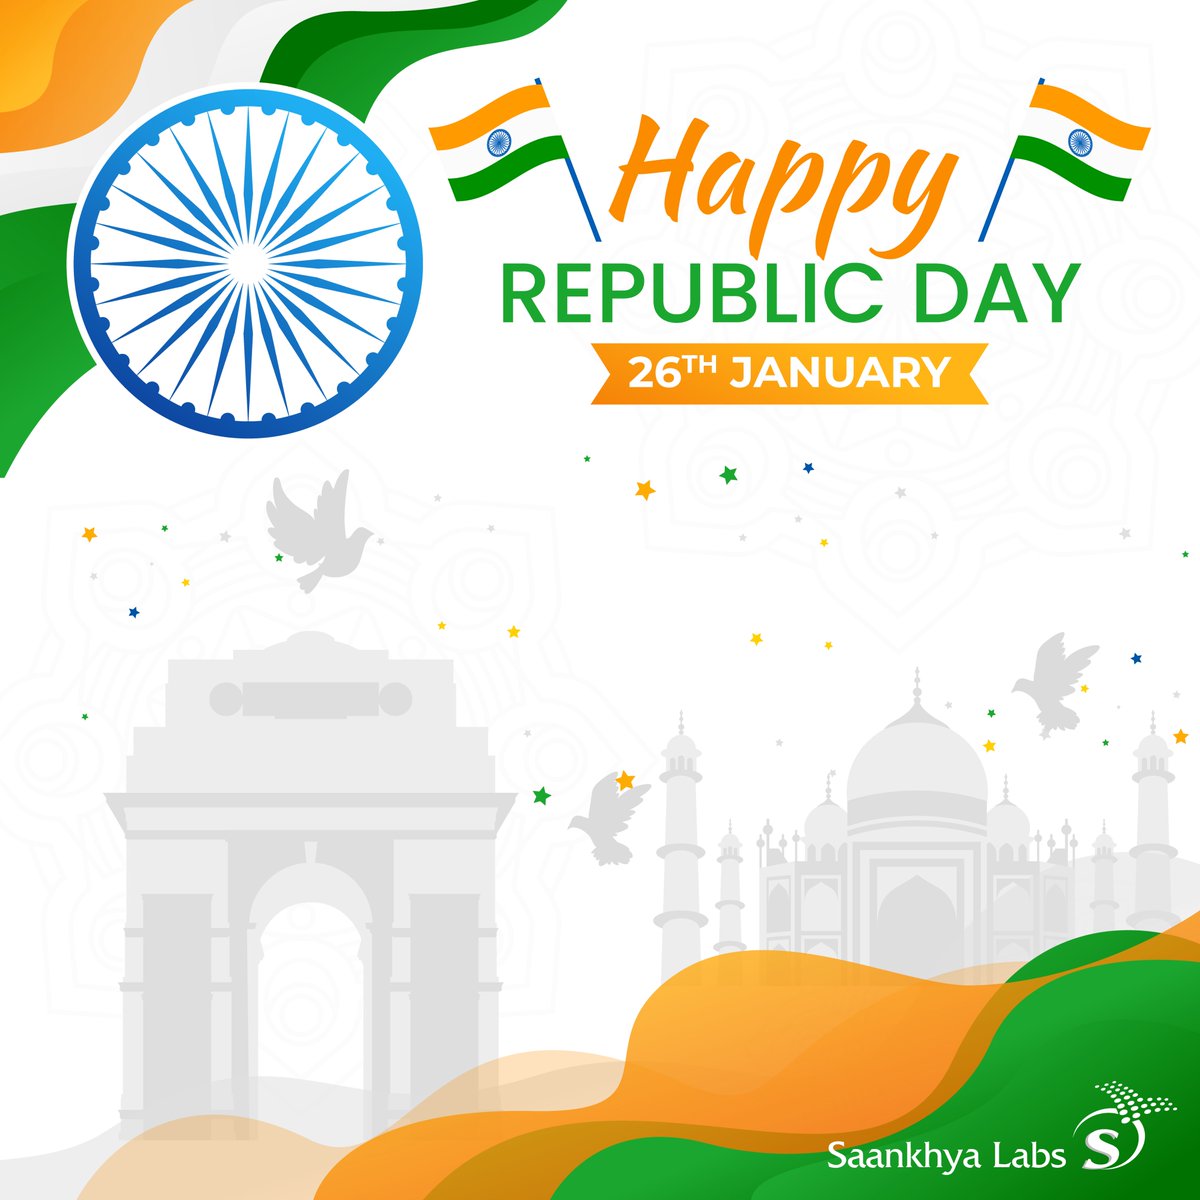 🇮🇳 Celebrating the heartbeat of our nation! 🎉 We wish everyone a Happy Republic Day! 🇮🇳 Let's tune into the frequencies of freedom, innovation, and unity. 📡 Here's to a symphony of progress and prosperity. May our aspirations reach new heights, just as our Navdoot!